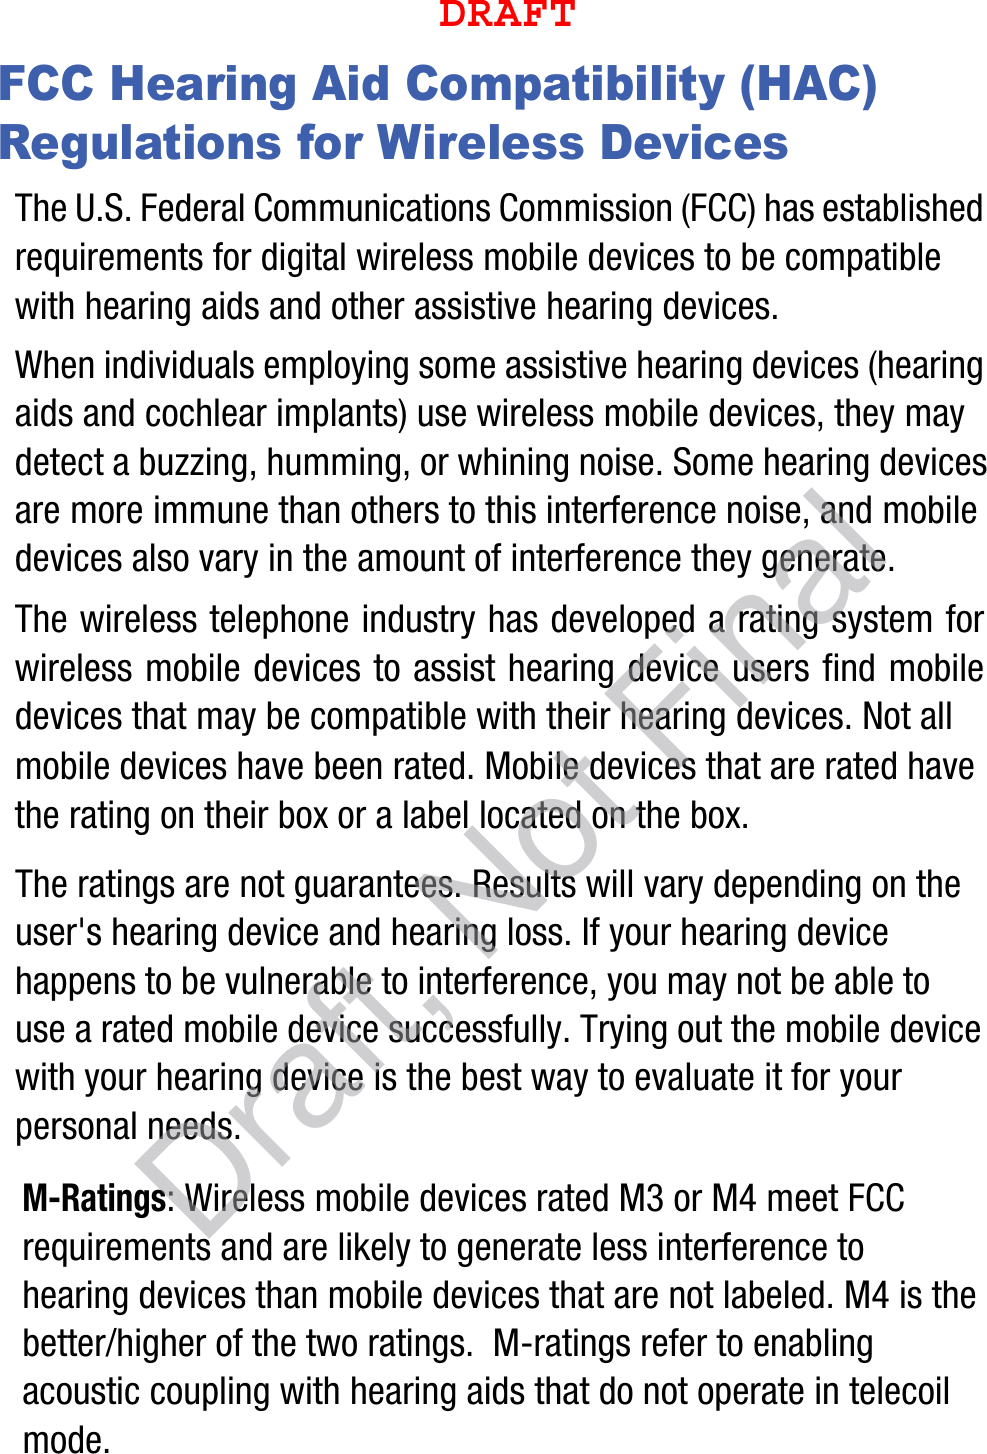 FCC Hearing Aid Compatibility (HAC) Regulations for Wireless DevicesThe U.S. Federal Communications Commission (FCC) has established requirements for digital wireless mobile devices to be compatible with hearing aids and other assistive hearing devices.When individuals employing some assistive hearing devices (hearing aids and cochlear implants) use wireless mobile devices, they may detect a buzzing, humming, or whining noise. Some hearing devices are more immune than others to this interference noise, and mobile devices also vary in the amount of interference they generate.The wireless telephone industry has developed a rating system for wireless mobile devices to assist hearing device users find mobile devices that may be compatible with their hearing devices. Not all mobile devices have been rated. Mobile devices that are rated have the rating on their box or a label located on the box.The ratings are not guarantees. Results will vary depending on the user&apos;s hearing device and hearing loss. If your hearing device happens to be vulnerable to interference, you may not be able to use a rated mobile device successfully. Trying out the mobile device with your hearing device is the best way to evaluate it for your personal needs.M-Ratings: Wireless mobile devices rated M3 or M4 meet FCC requirements and are likely to generate less interference to hearing devices than mobile devices that are not labeled. M4 is the better/higher of the two ratings.  M-ratings refer to enabling acoustic coupling with hearing aids that do not operate in telecoil mode.DRAFTDraft, Not Final